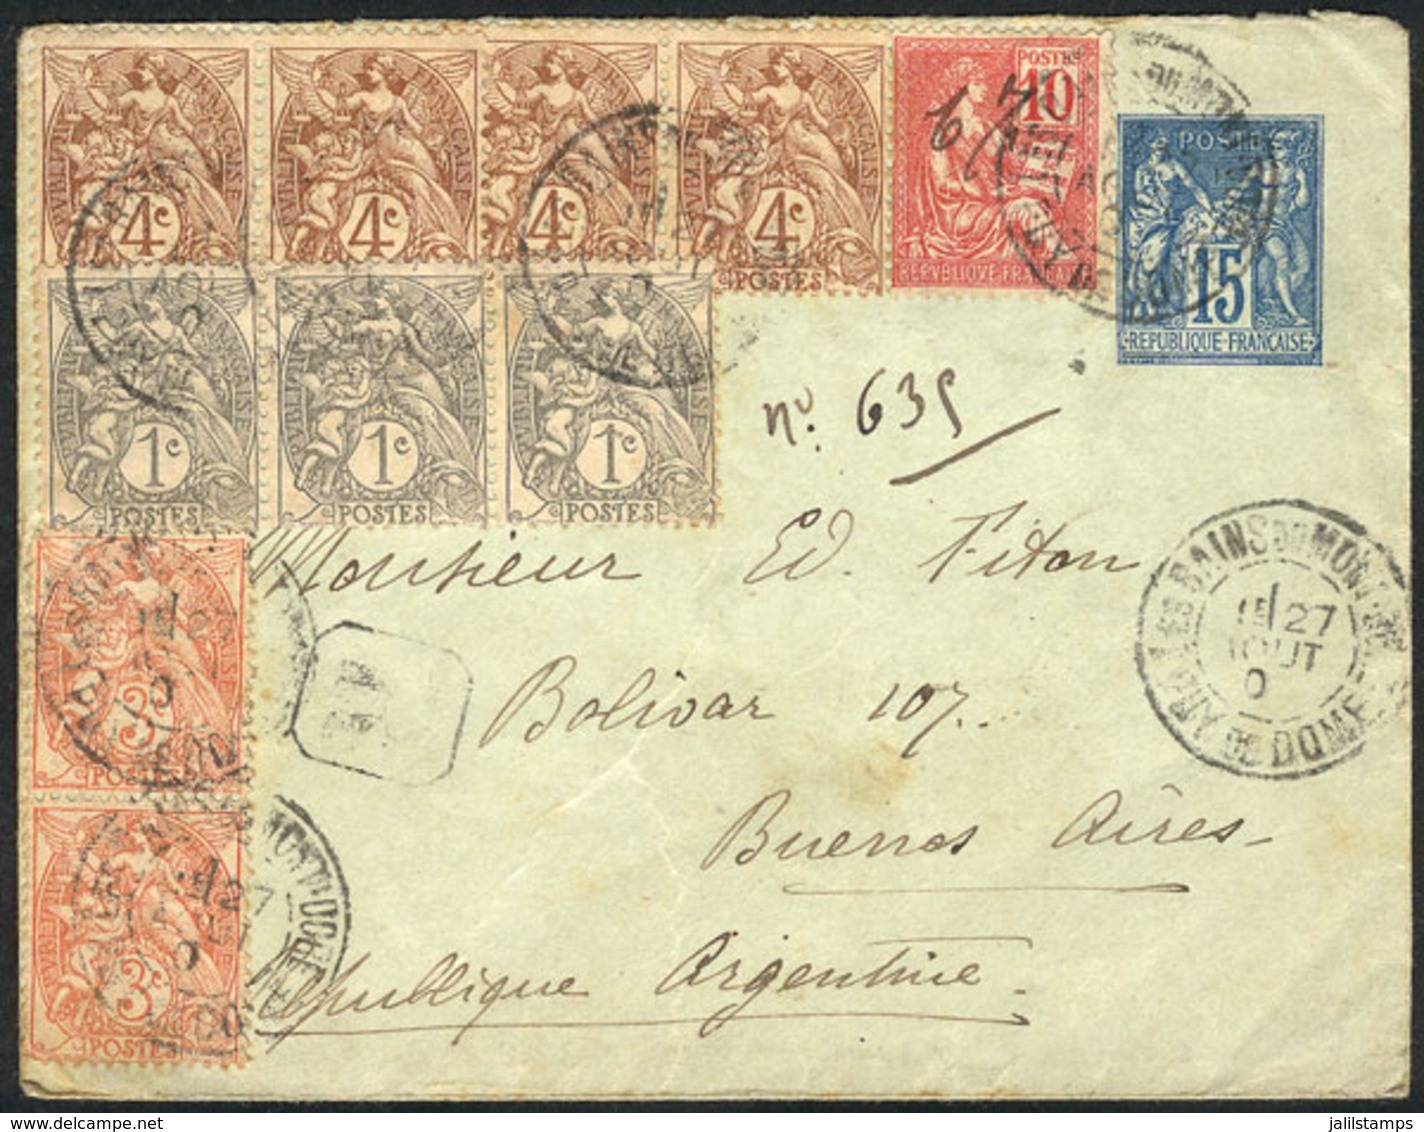 FRANCE: 15c. Stationery Envelope + 10 Stamps Totalling The Rate Of 50c., Sent By Registered Mail To Argentina On 27/AU/1 - Covers & Documents